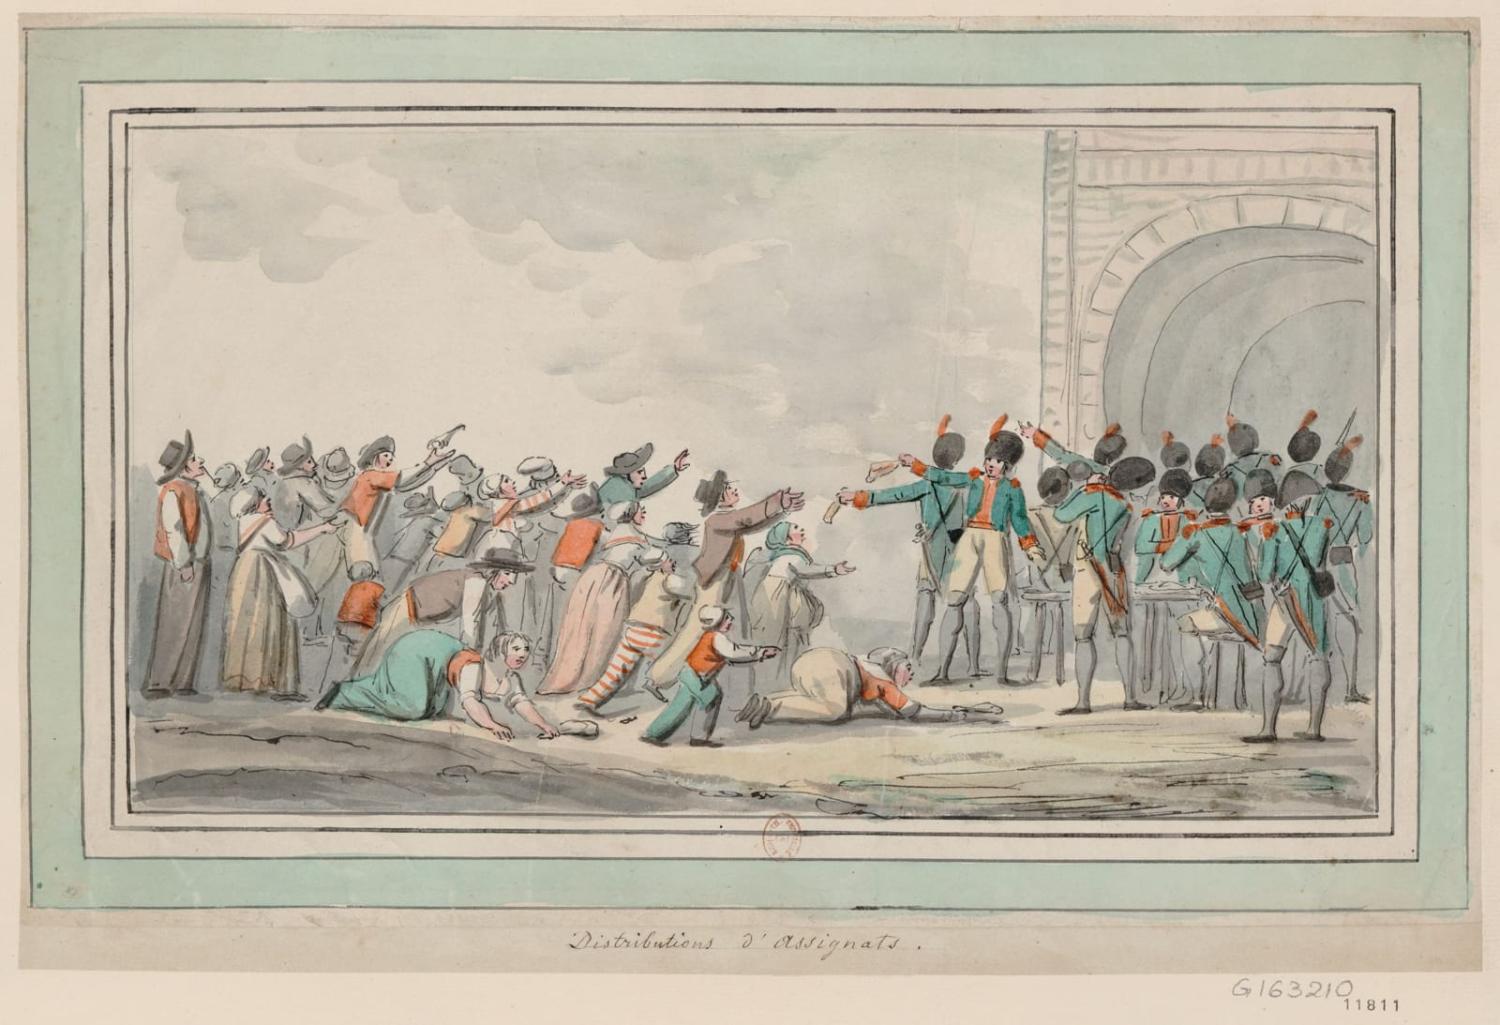 Distribution of Assignats, drawing by E. Béricourt, c. 1793 (National Library of France, used under Creative Commons licence)